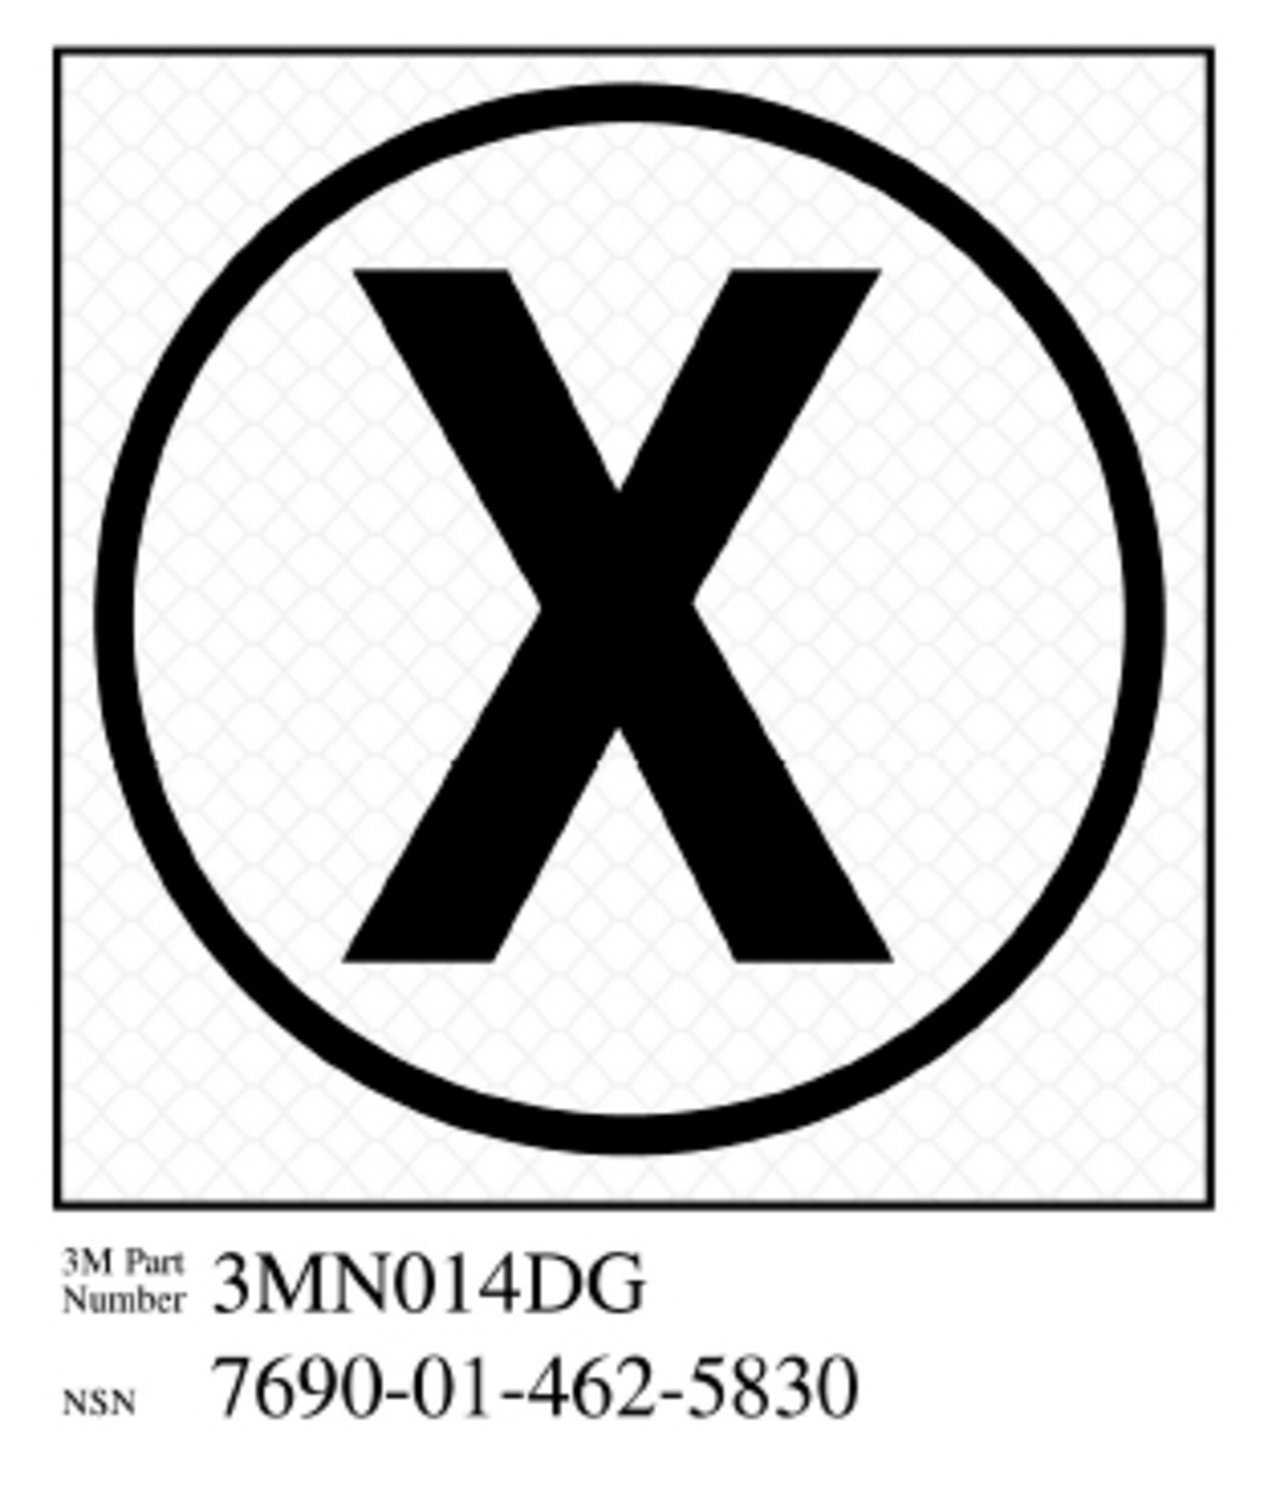 7010317673 - 3M Diamond Grade Damage Control Sign 3MN014DG, "Cir X-Ray", 3 in x 3
in, 10/Package